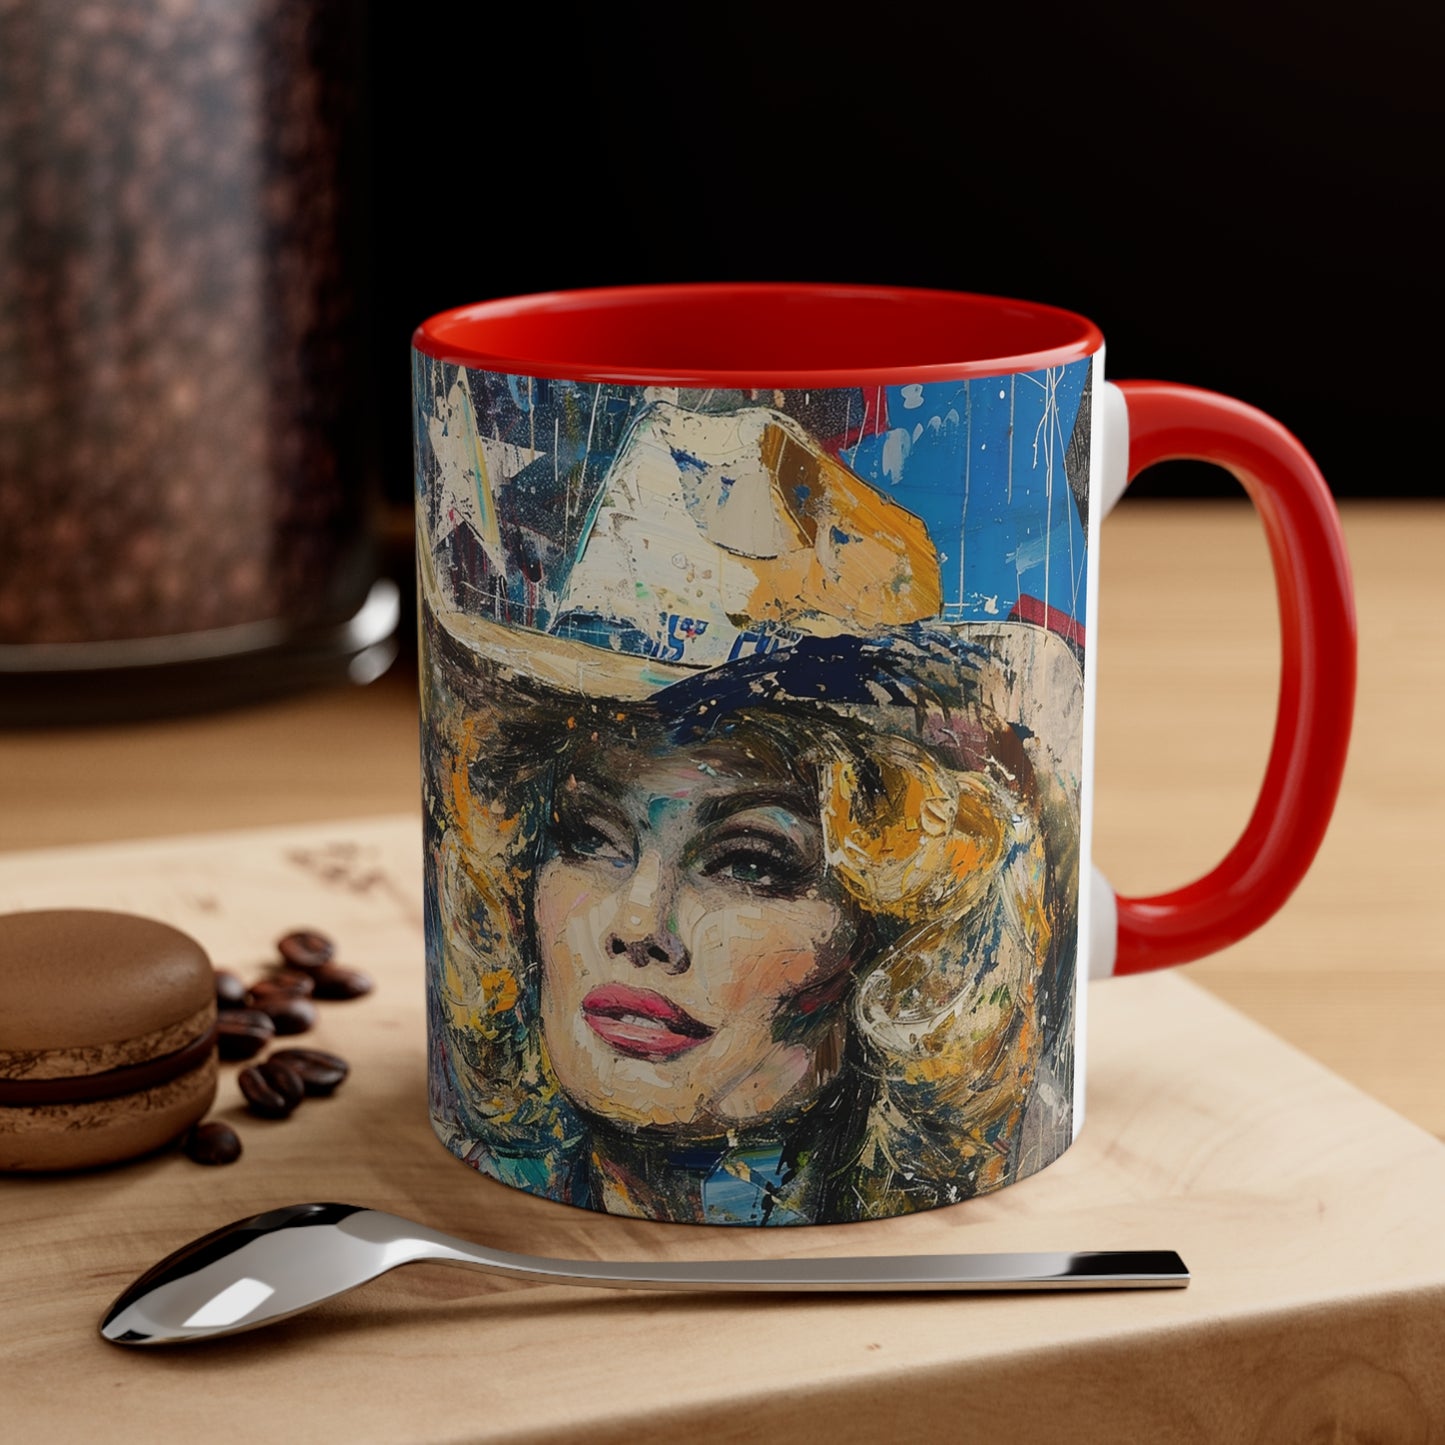 Accent Coffee Mug, 11oz - Country Queen red